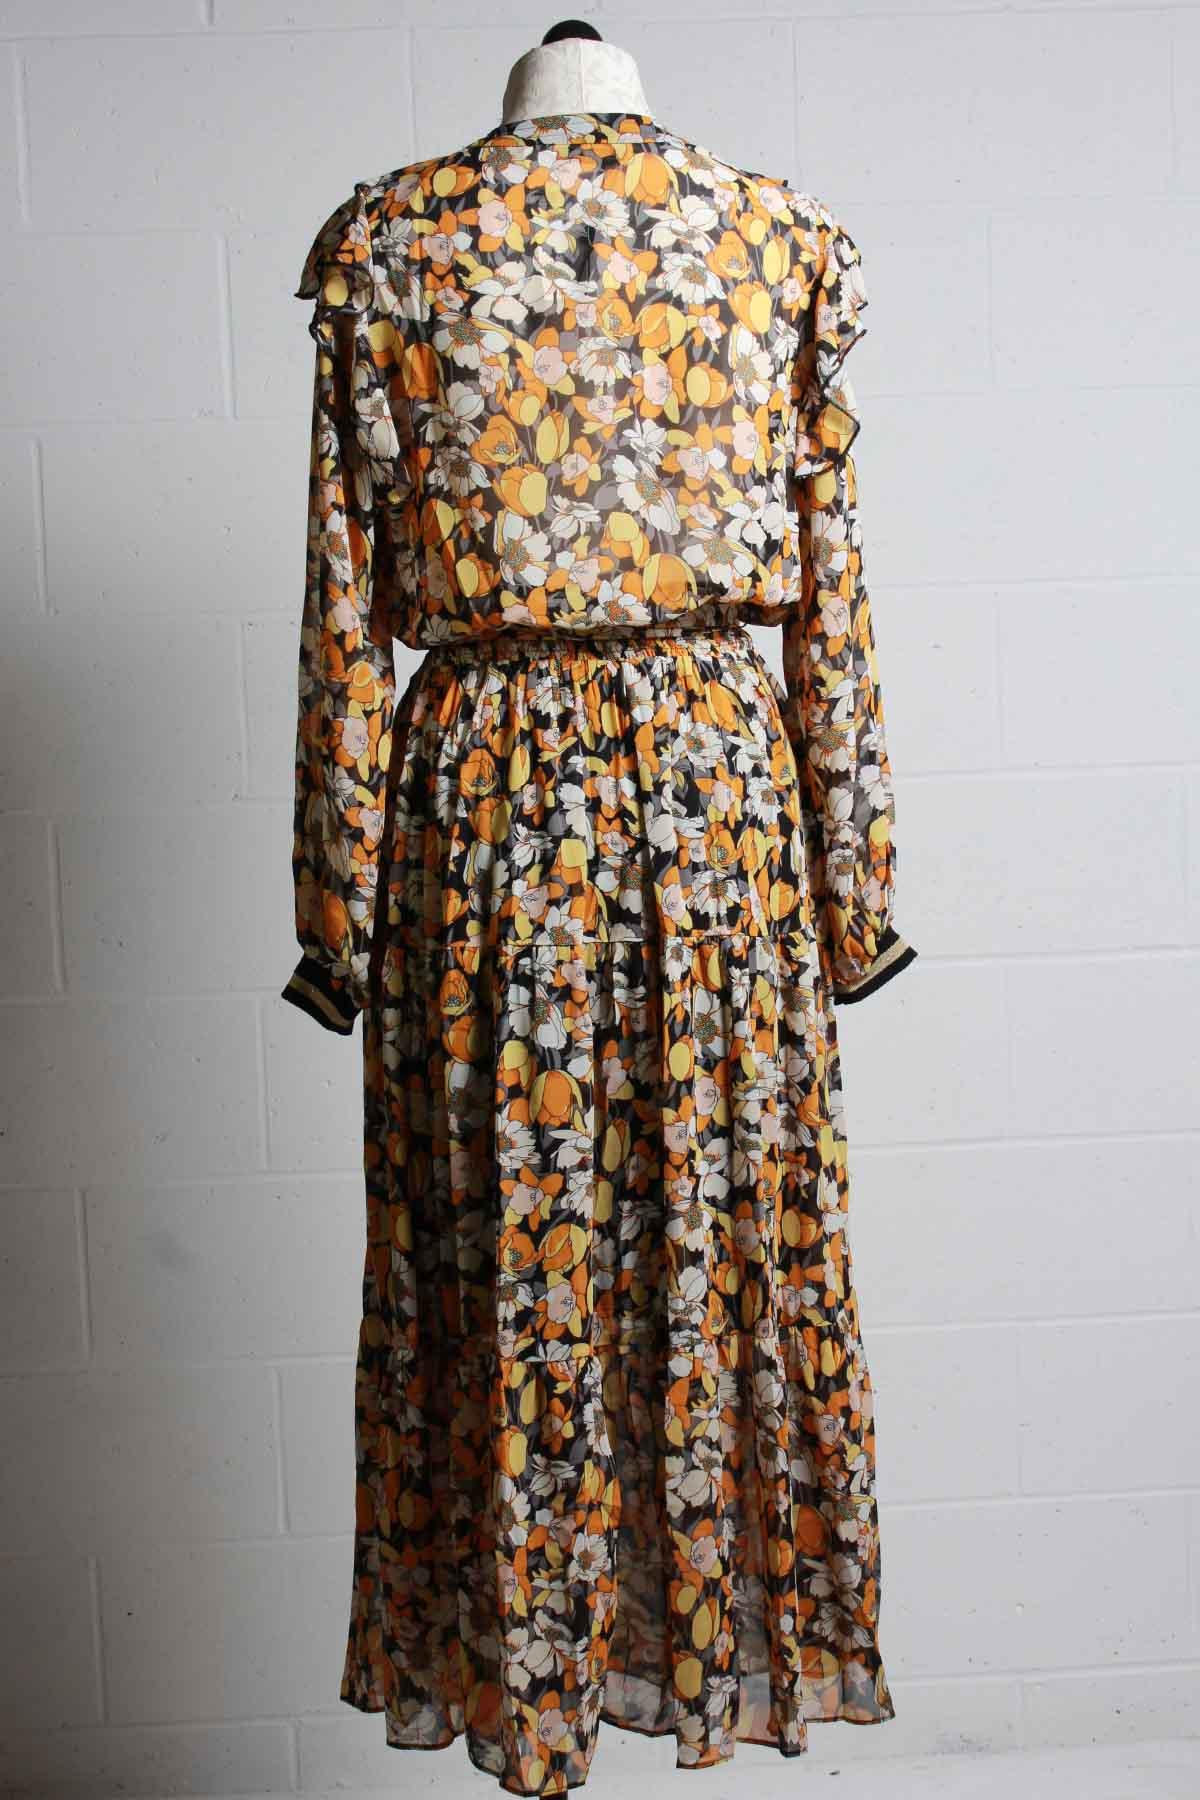 back view of floral ruffle front Midi Dress in gold colors by Summum Woman. 